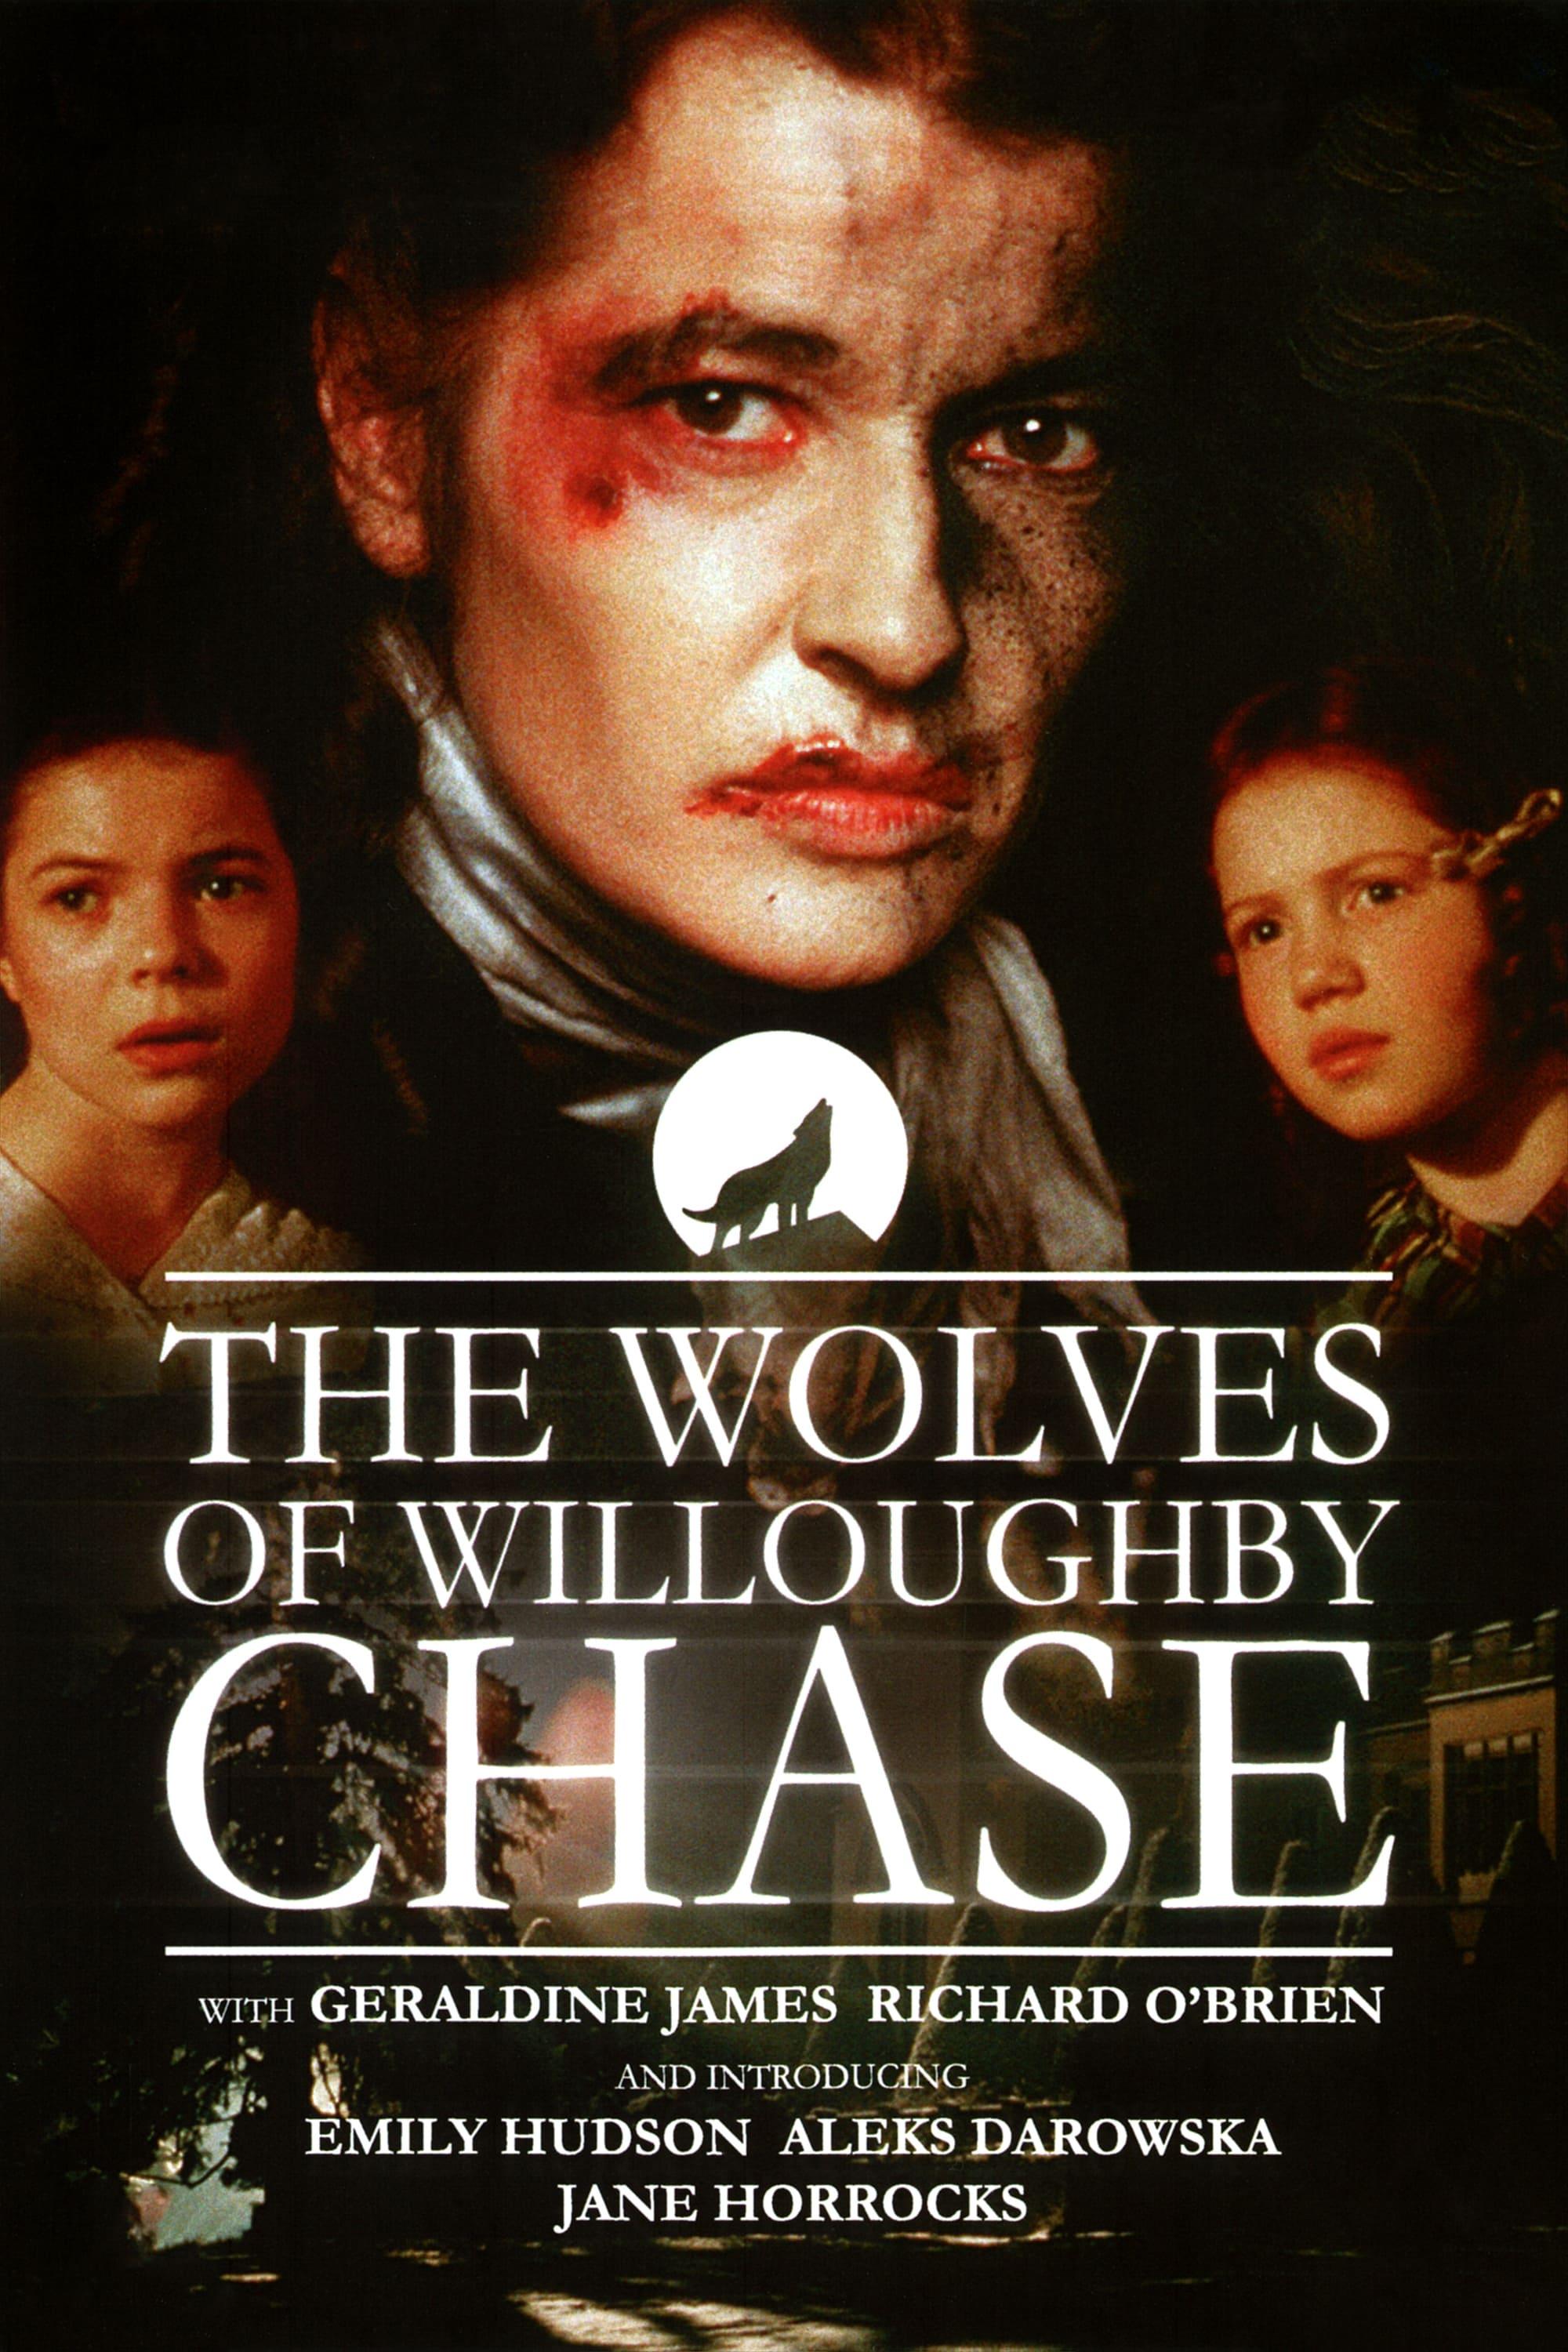 The Wolves of Willoughby Chase poster